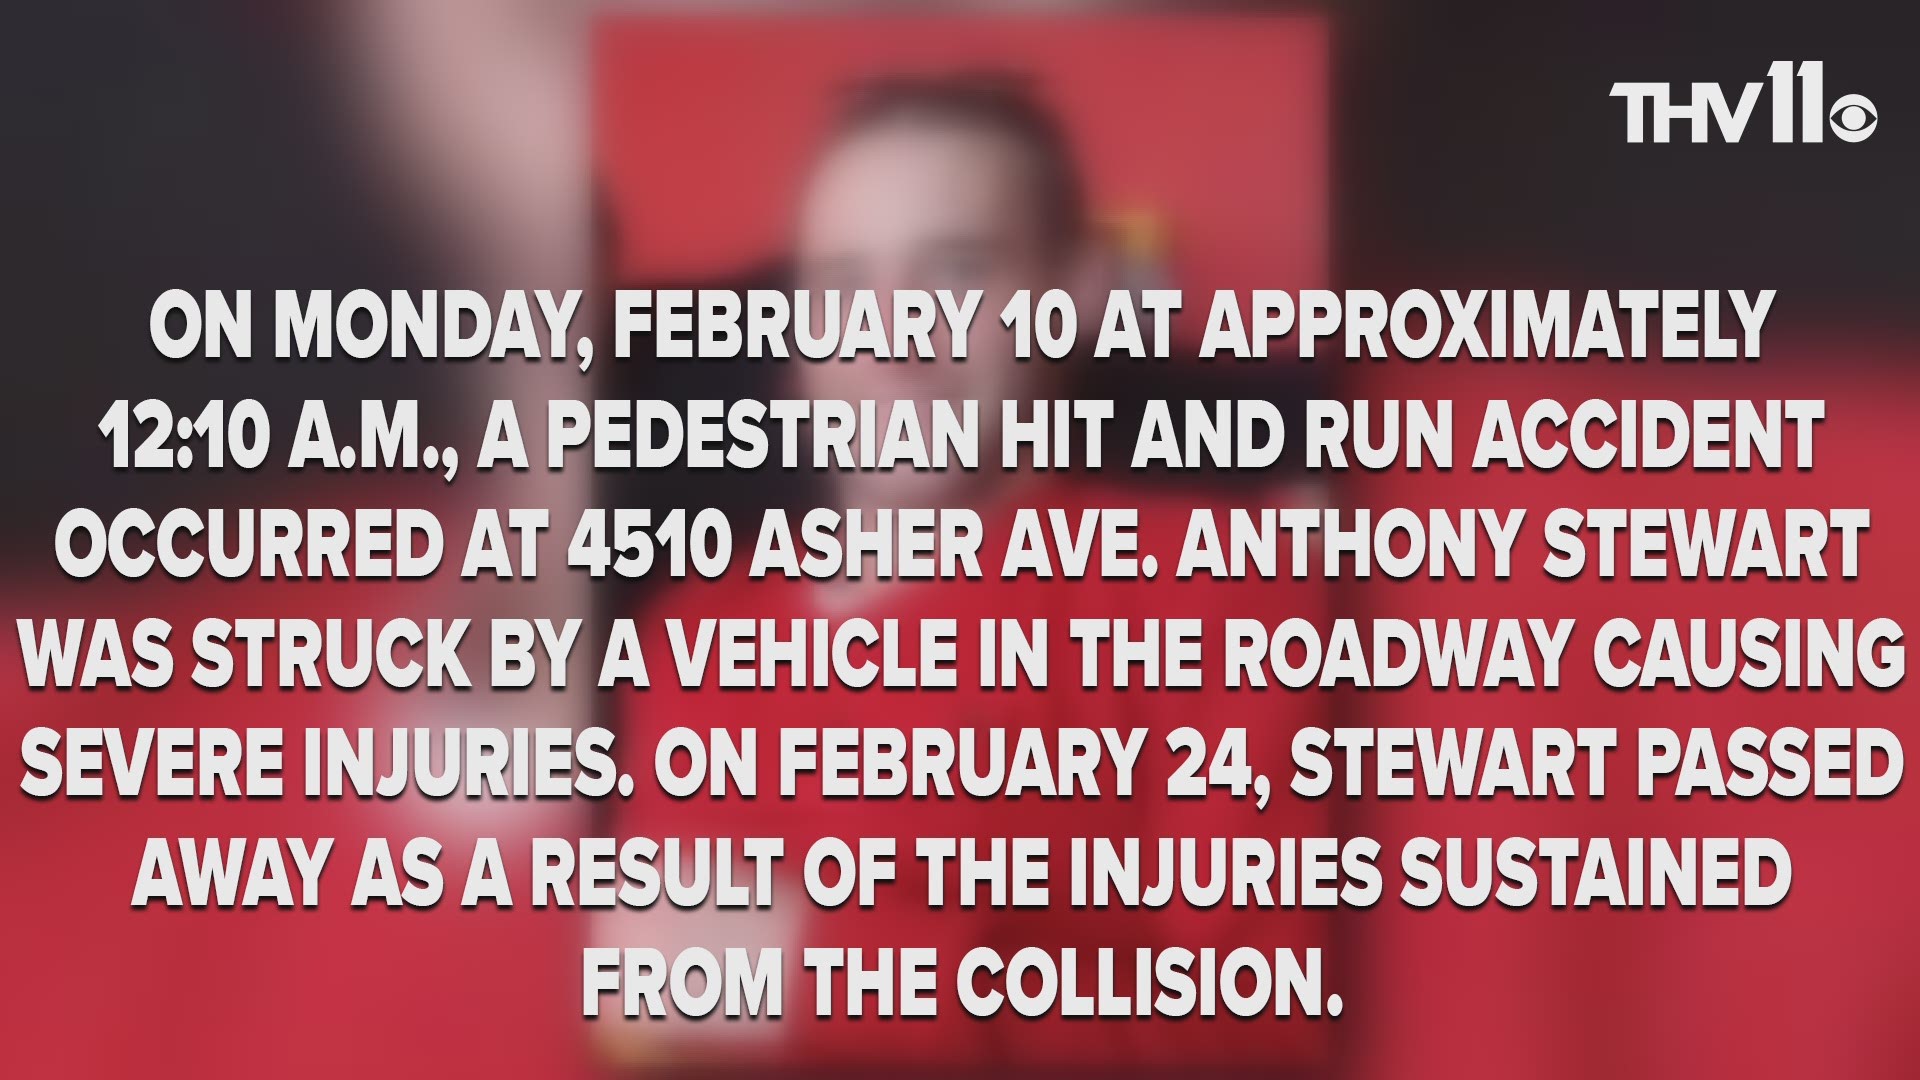 On Monday, February 10, at approximately 12:10 a.m., a pedestrian hit and run accident occurred at 4510 Asher Ave.